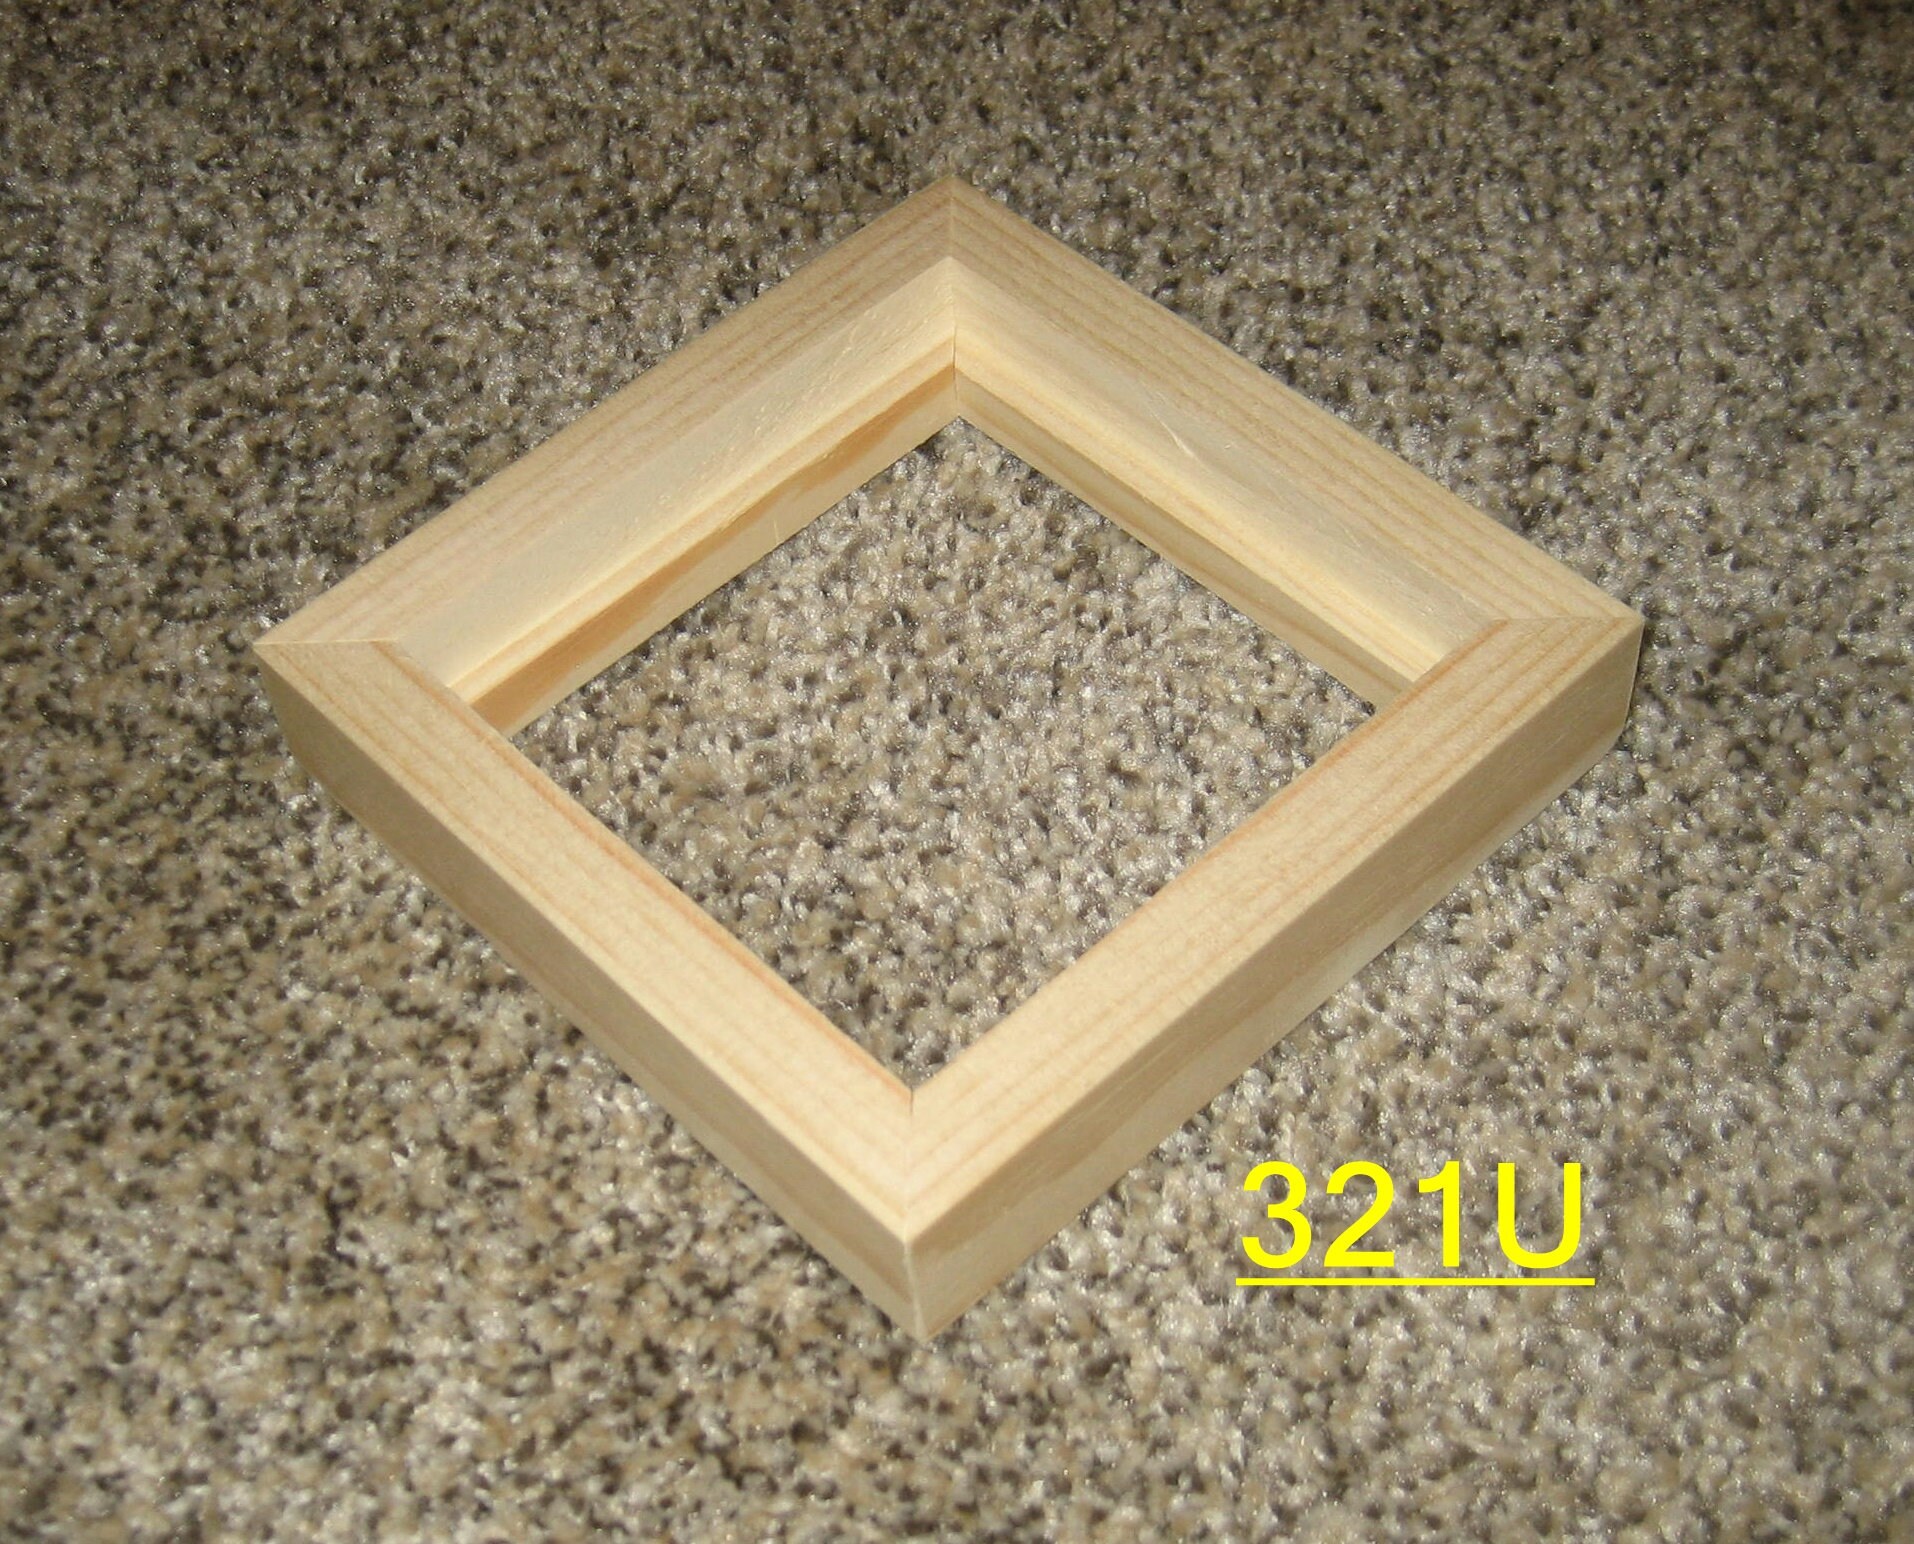 Cherry Quilting Frame 